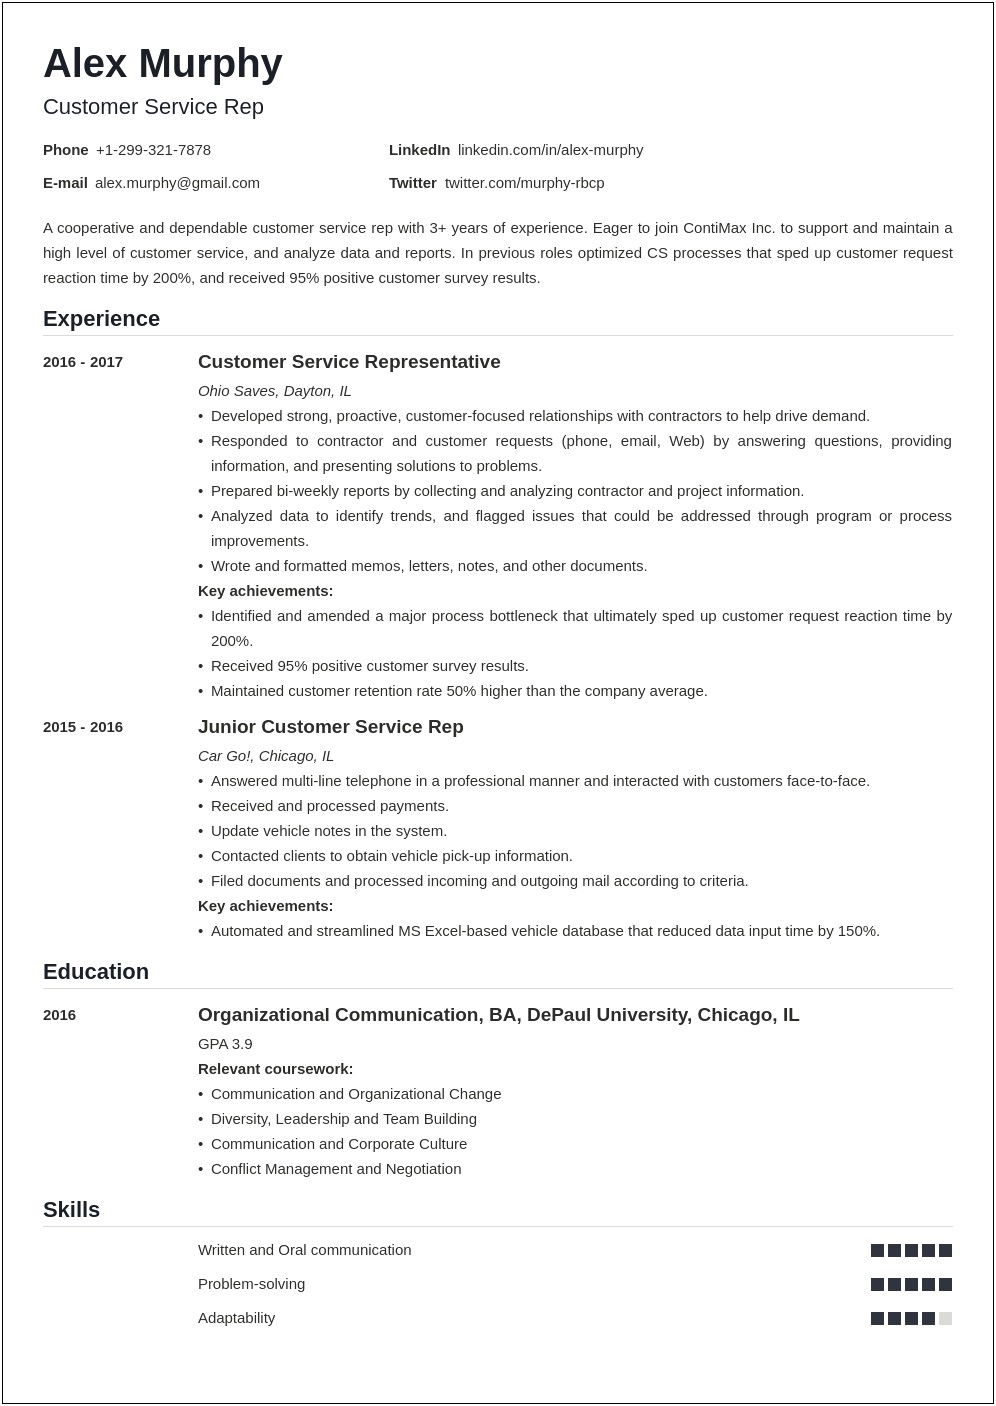 Resume Include Working On Farm In High School